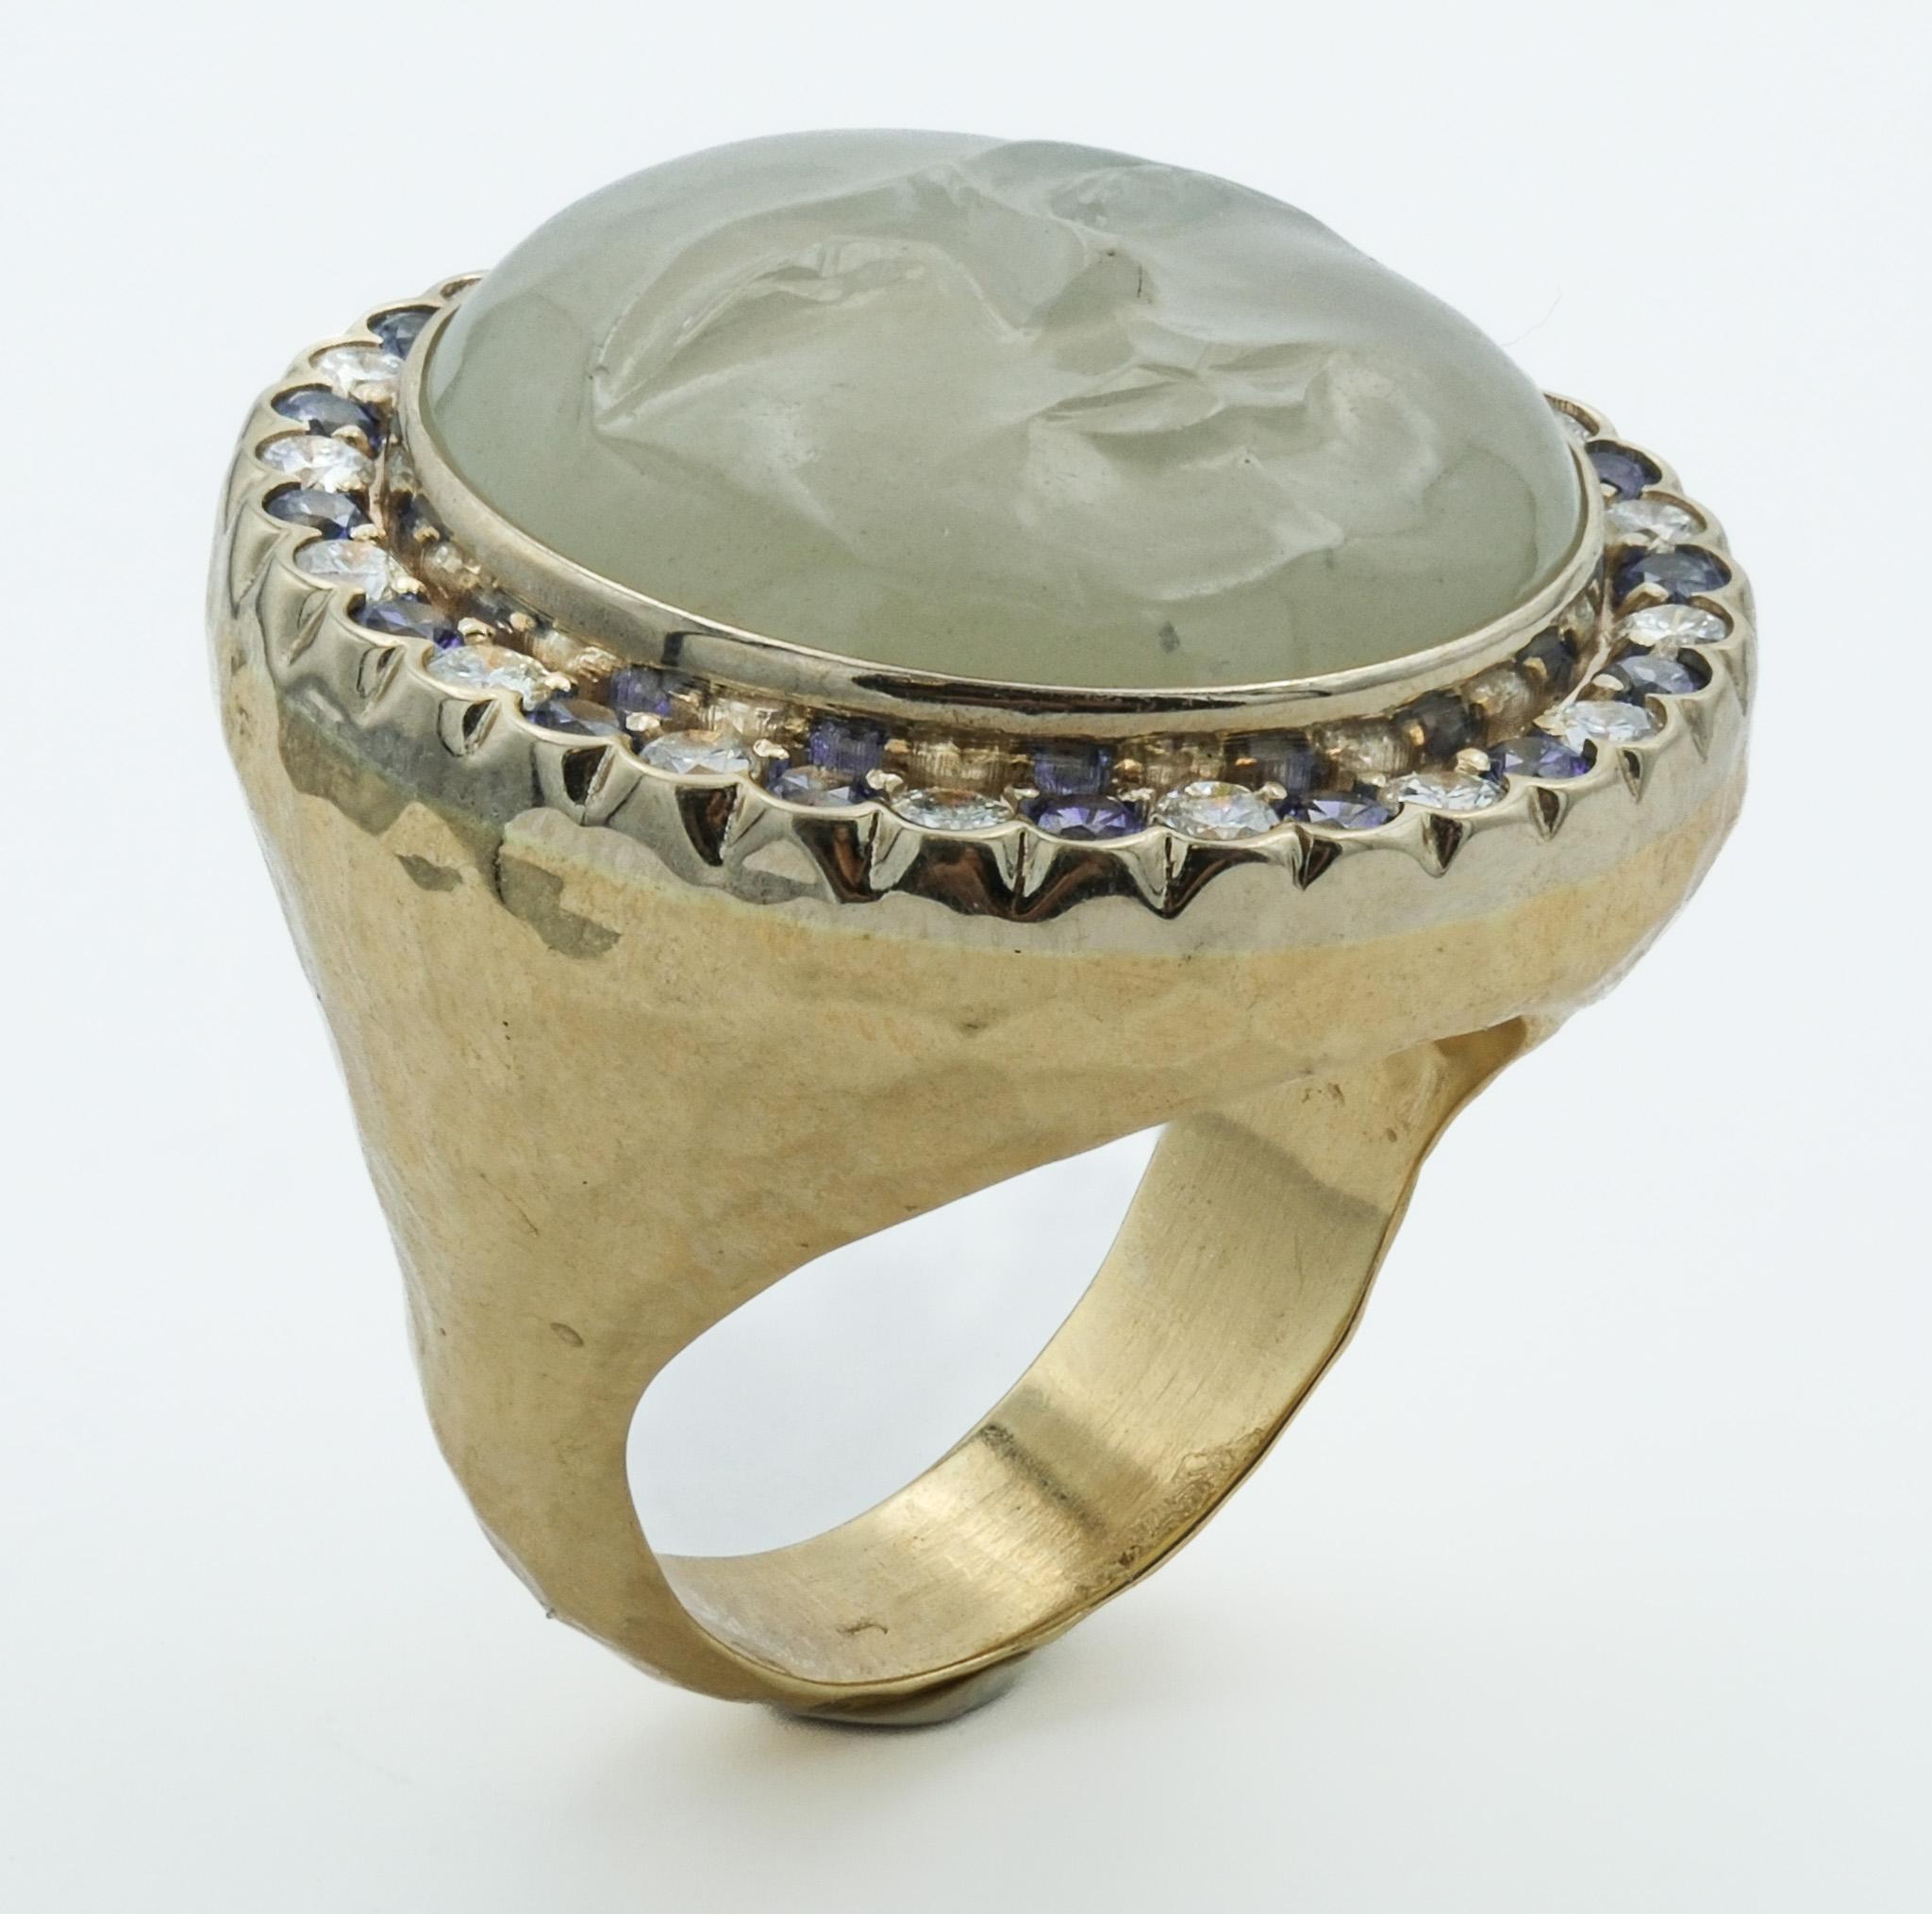 This artisan-crafted ring is a unique masterpiece, blending whimsical design with luxurious materials. At its center is a beautifully carved moonstone face that exudes tranquility, with a serene expression and soft, ethereal glow. The moonstone is